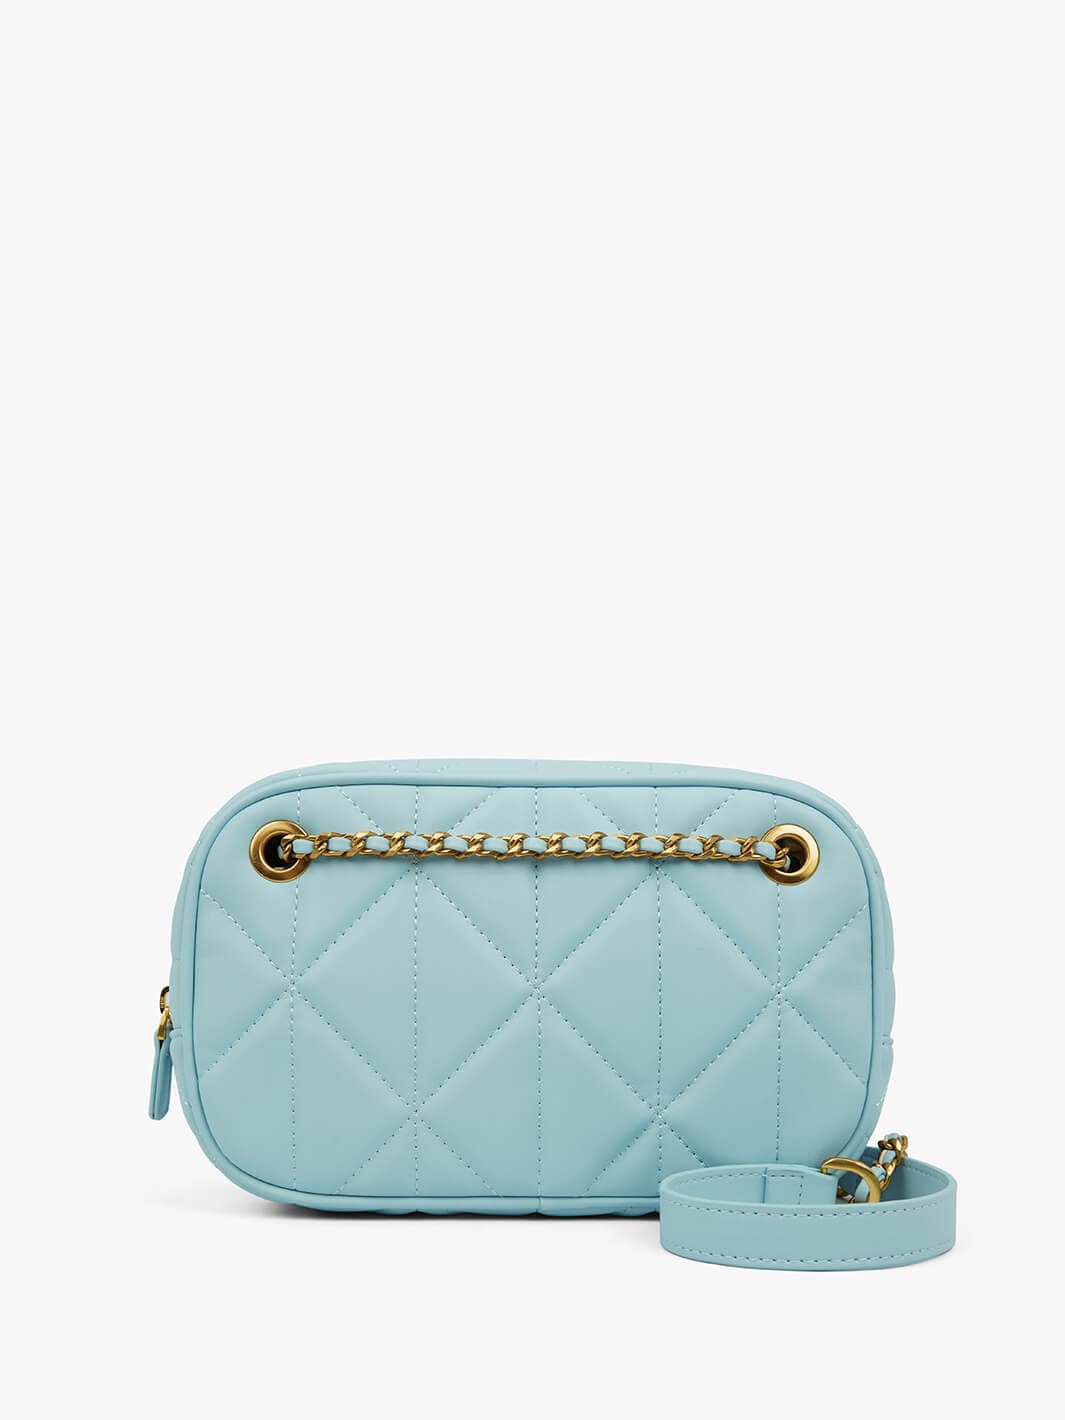 Vegan Leather Clutch Vegan Quilted Leather Clutch Quilted 